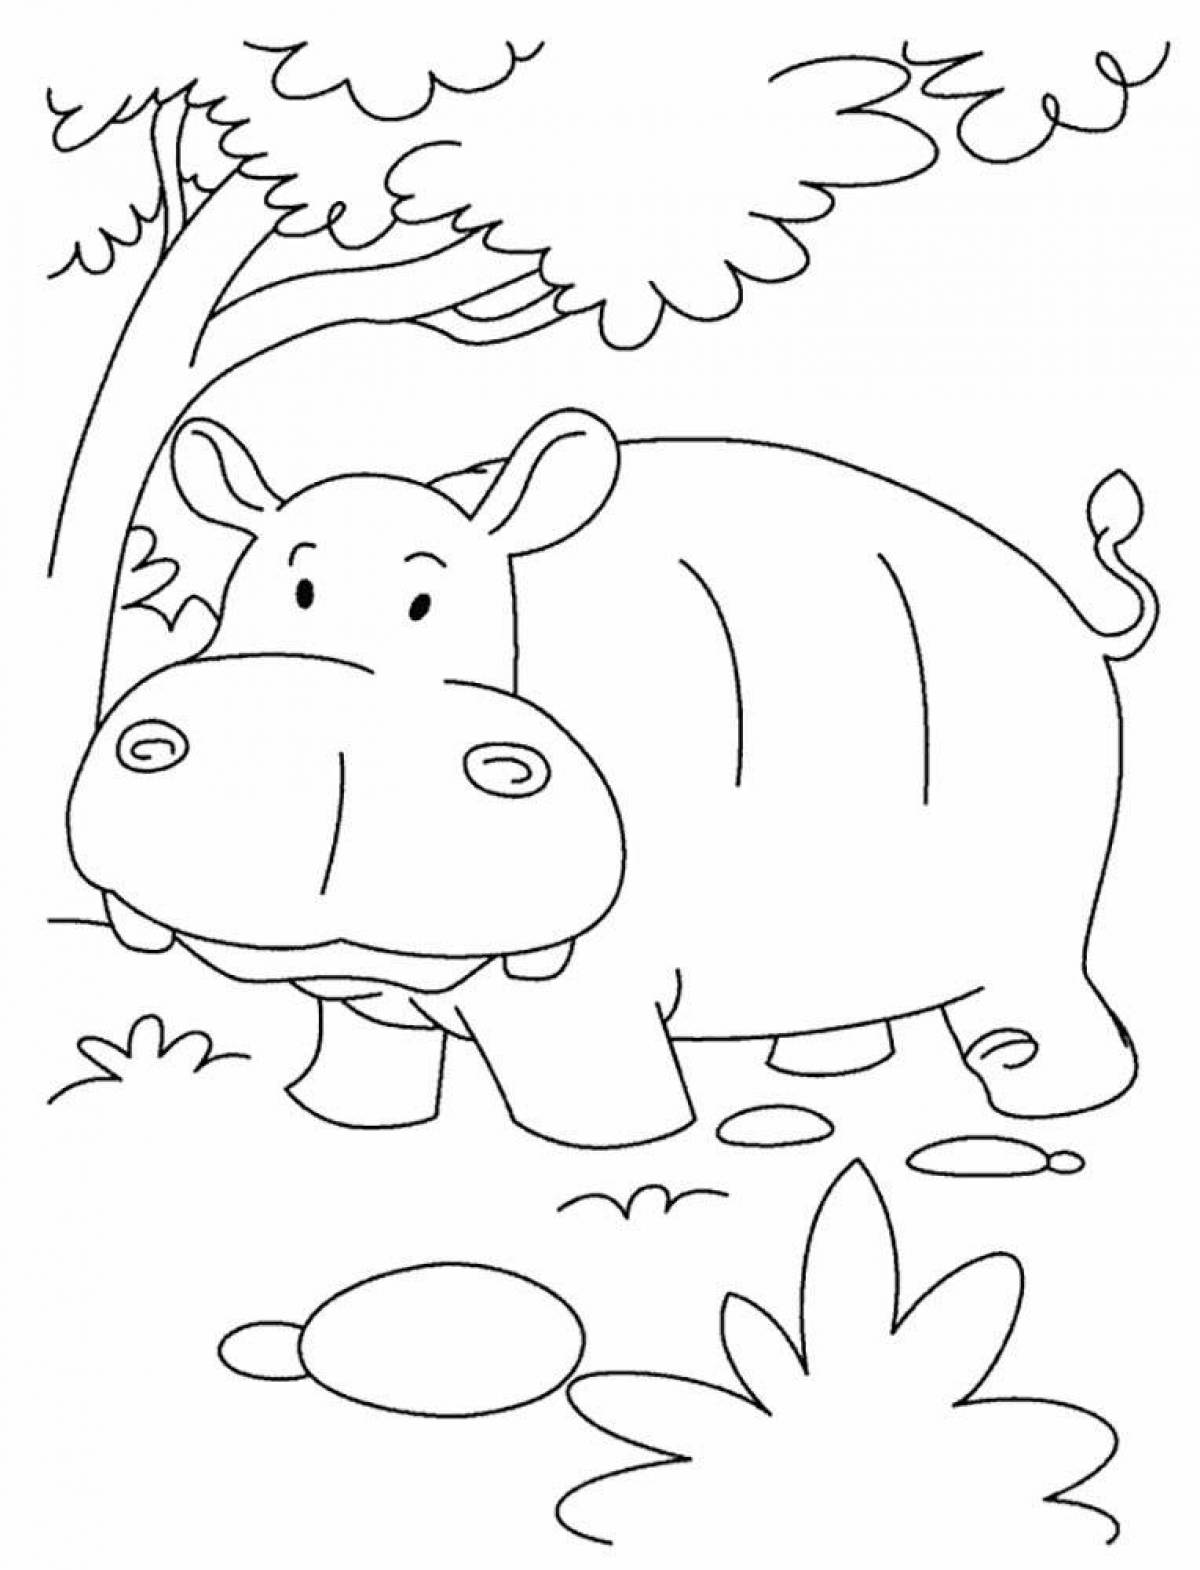 Creative hippo coloring for kids